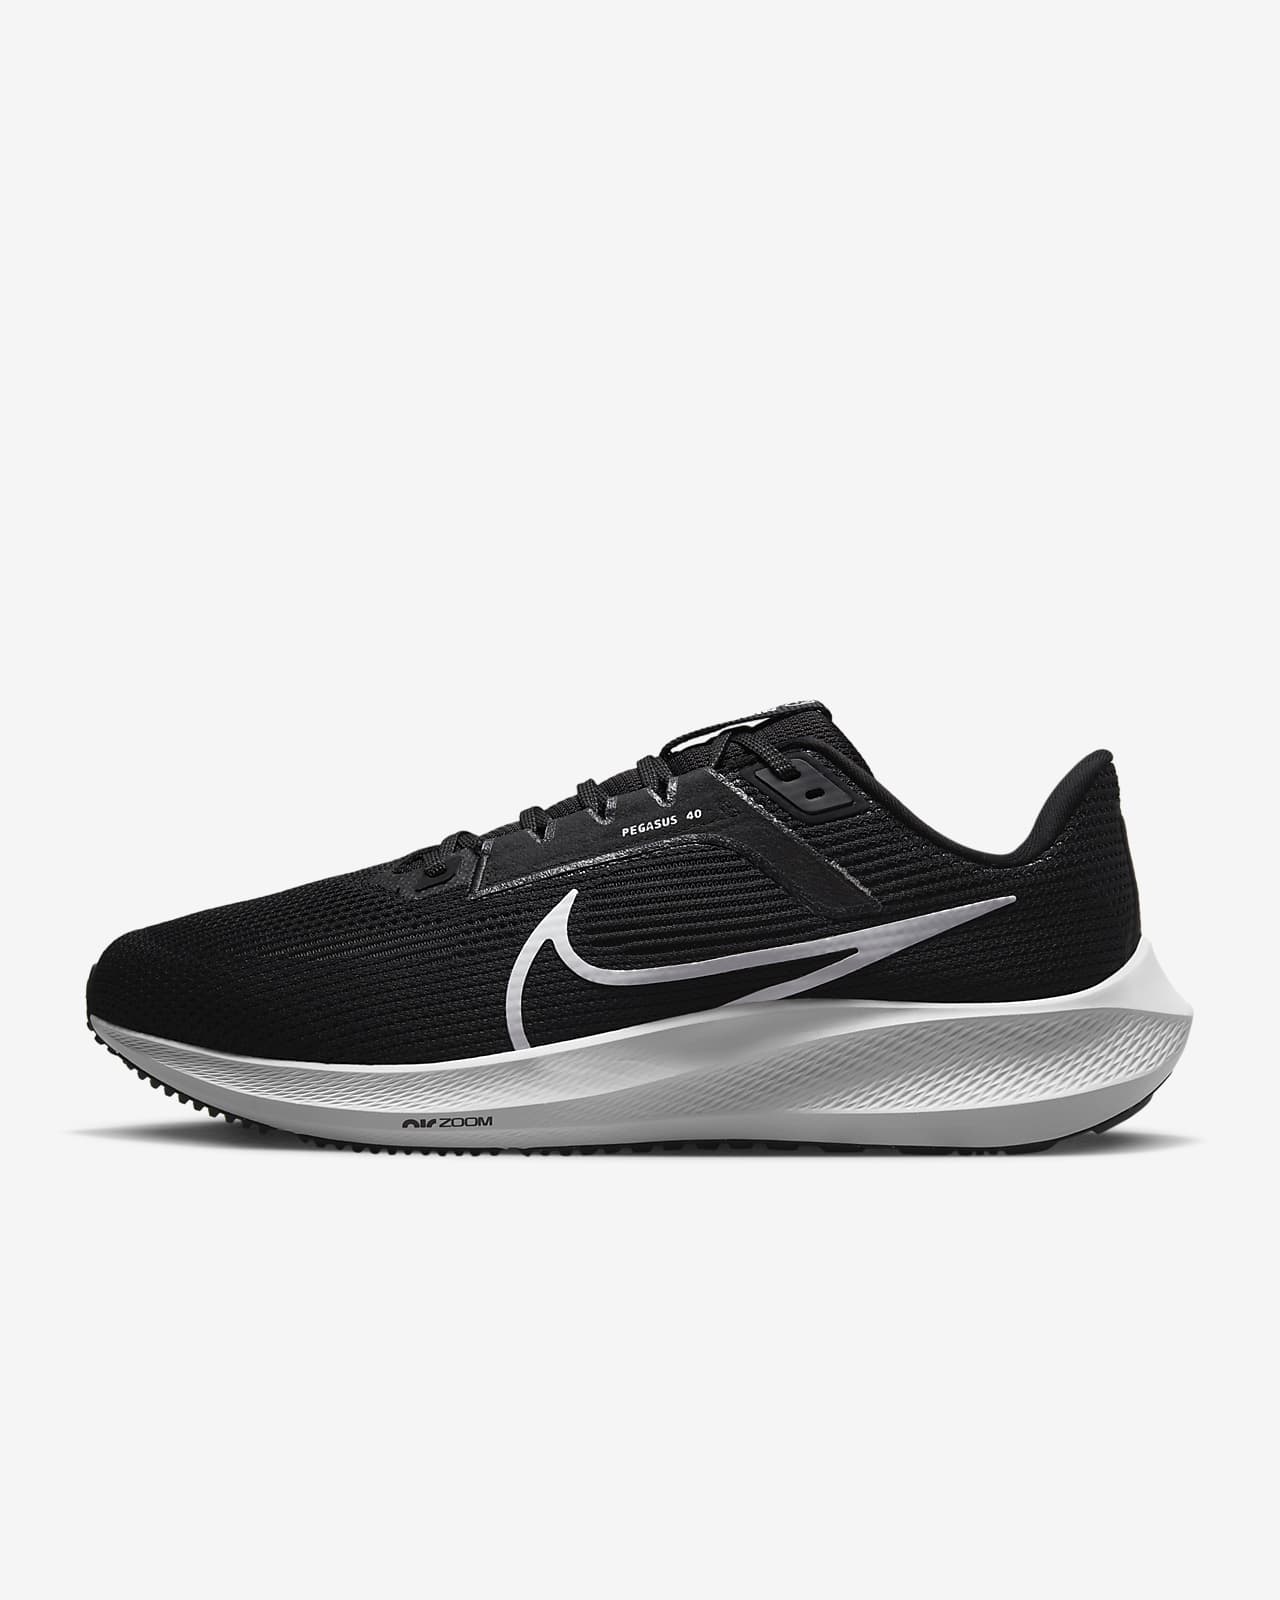 Nike 40 Men's Running Shoes (Extra Wide). Nike